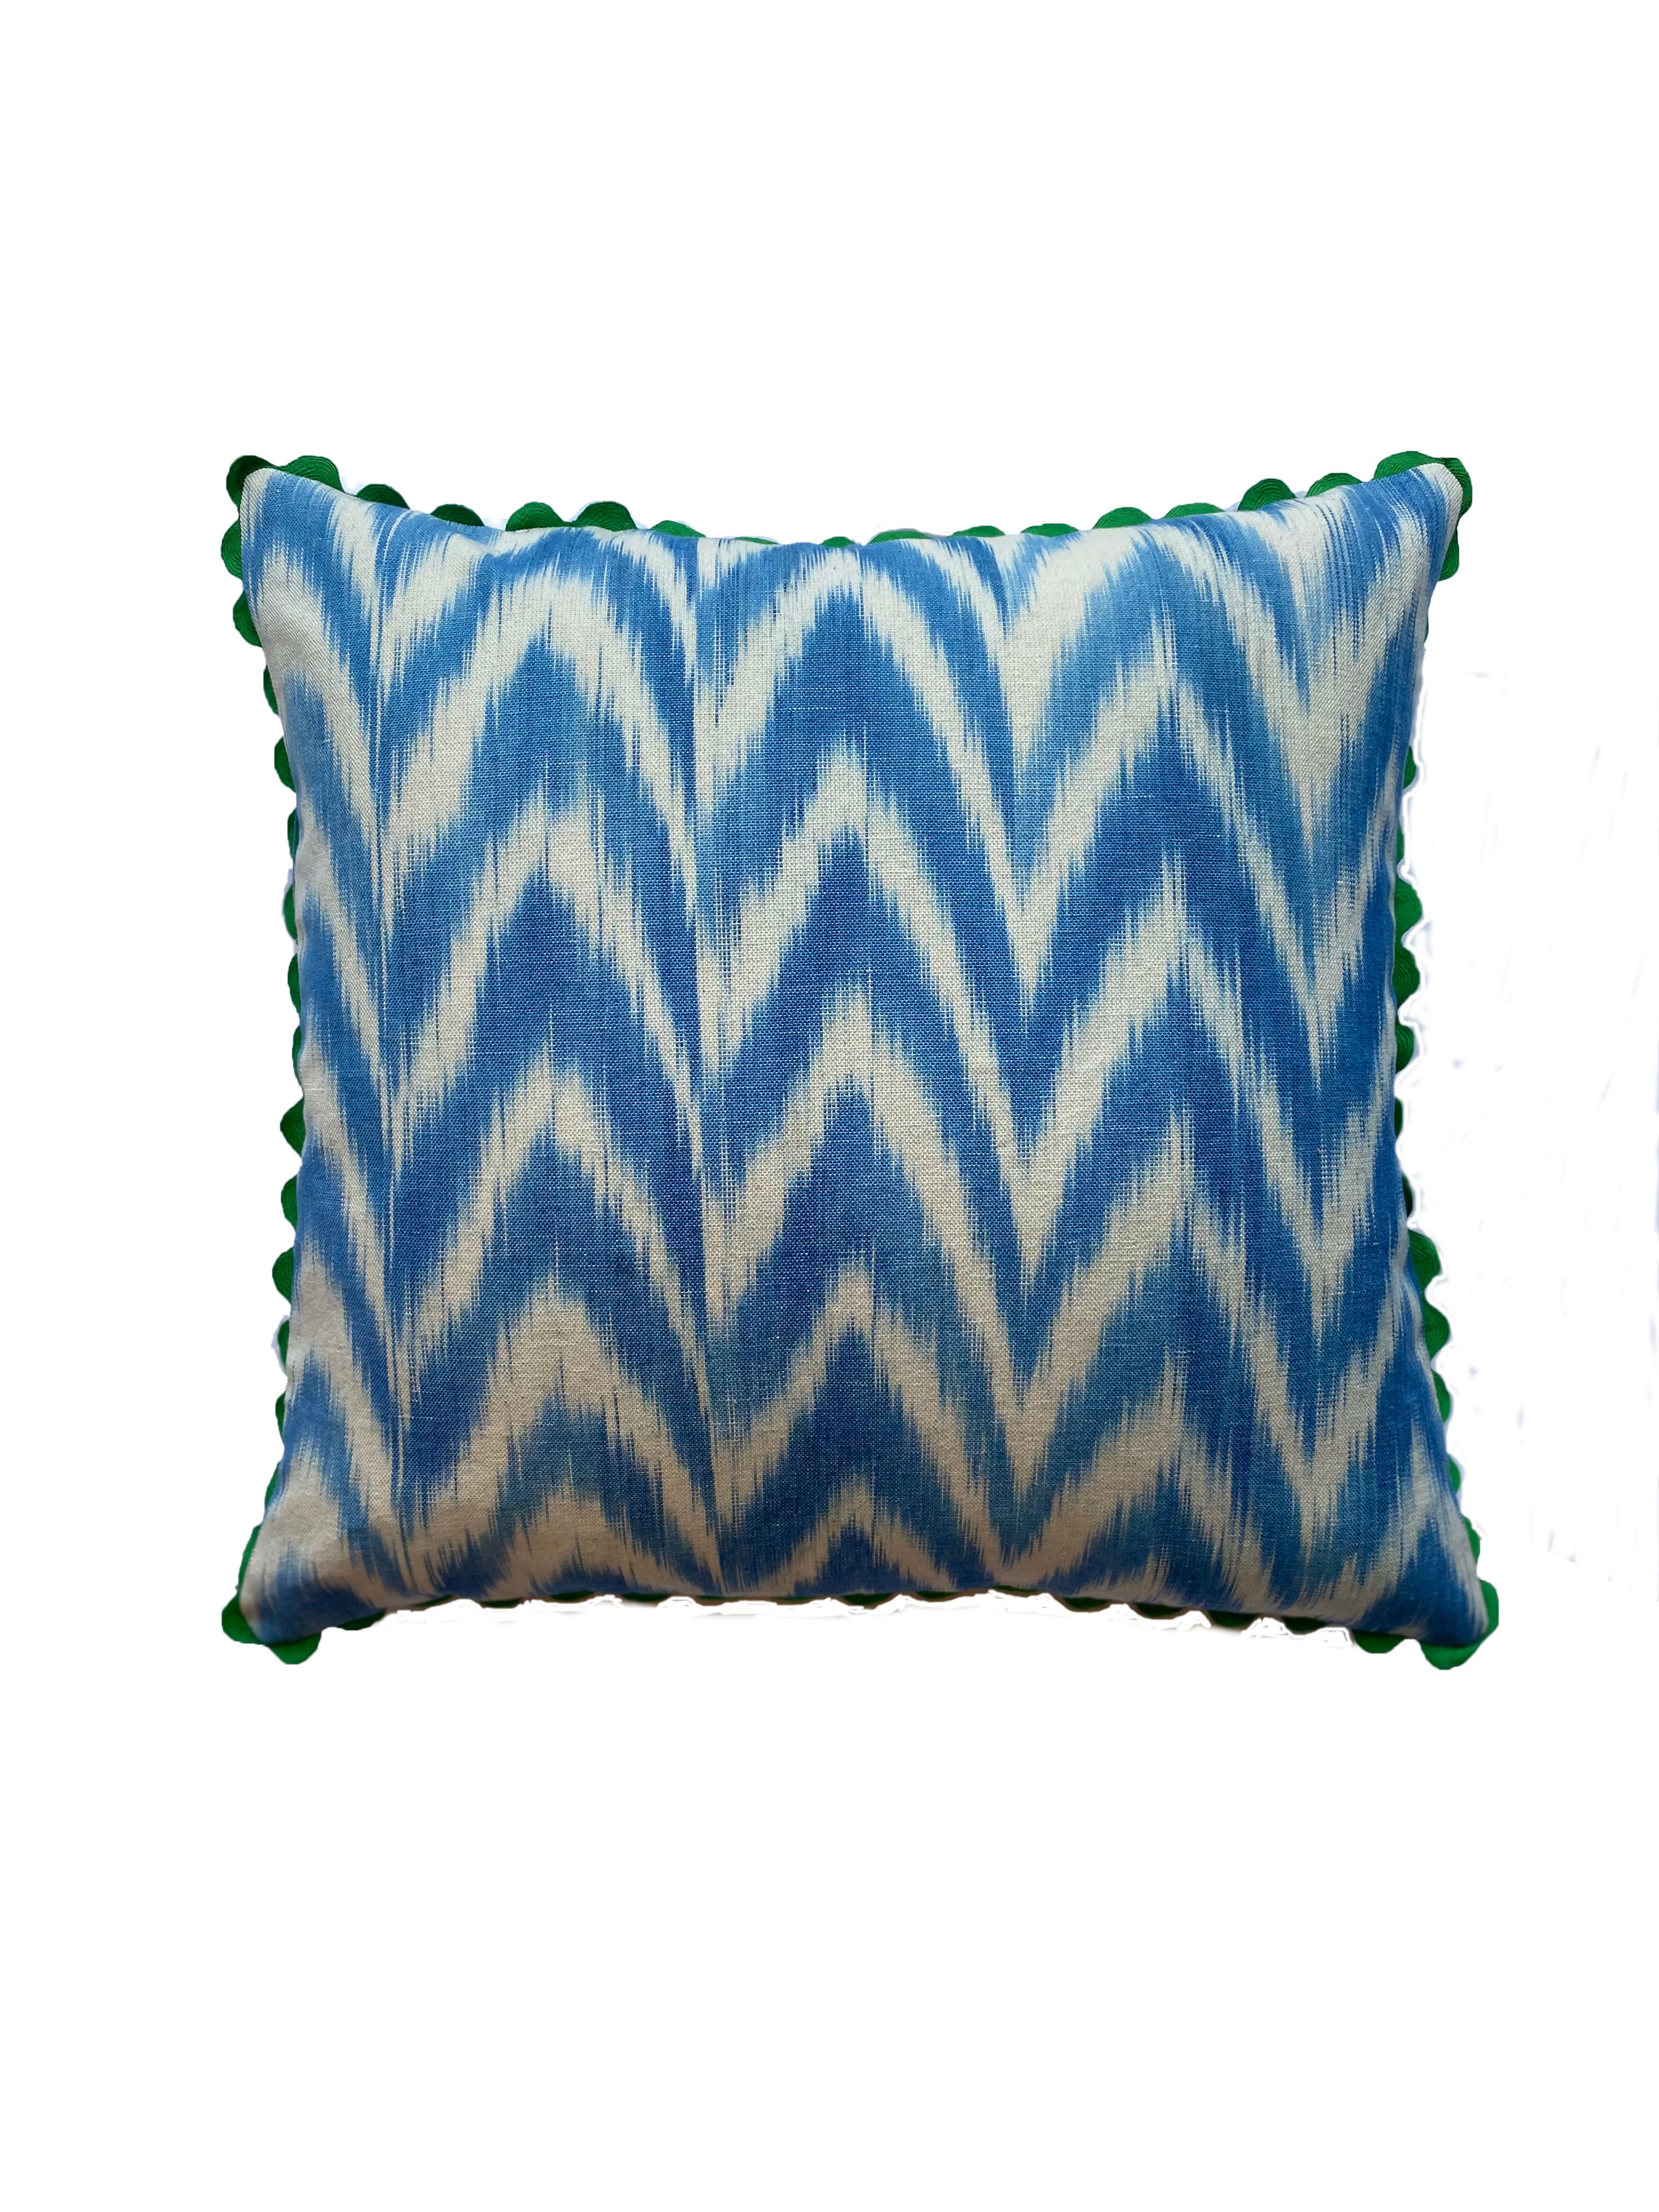 MALLORCAN FABRIC CUSHION - SKY BLUE FLAMESTITCH WITH GREEN SCALLOP EDGING